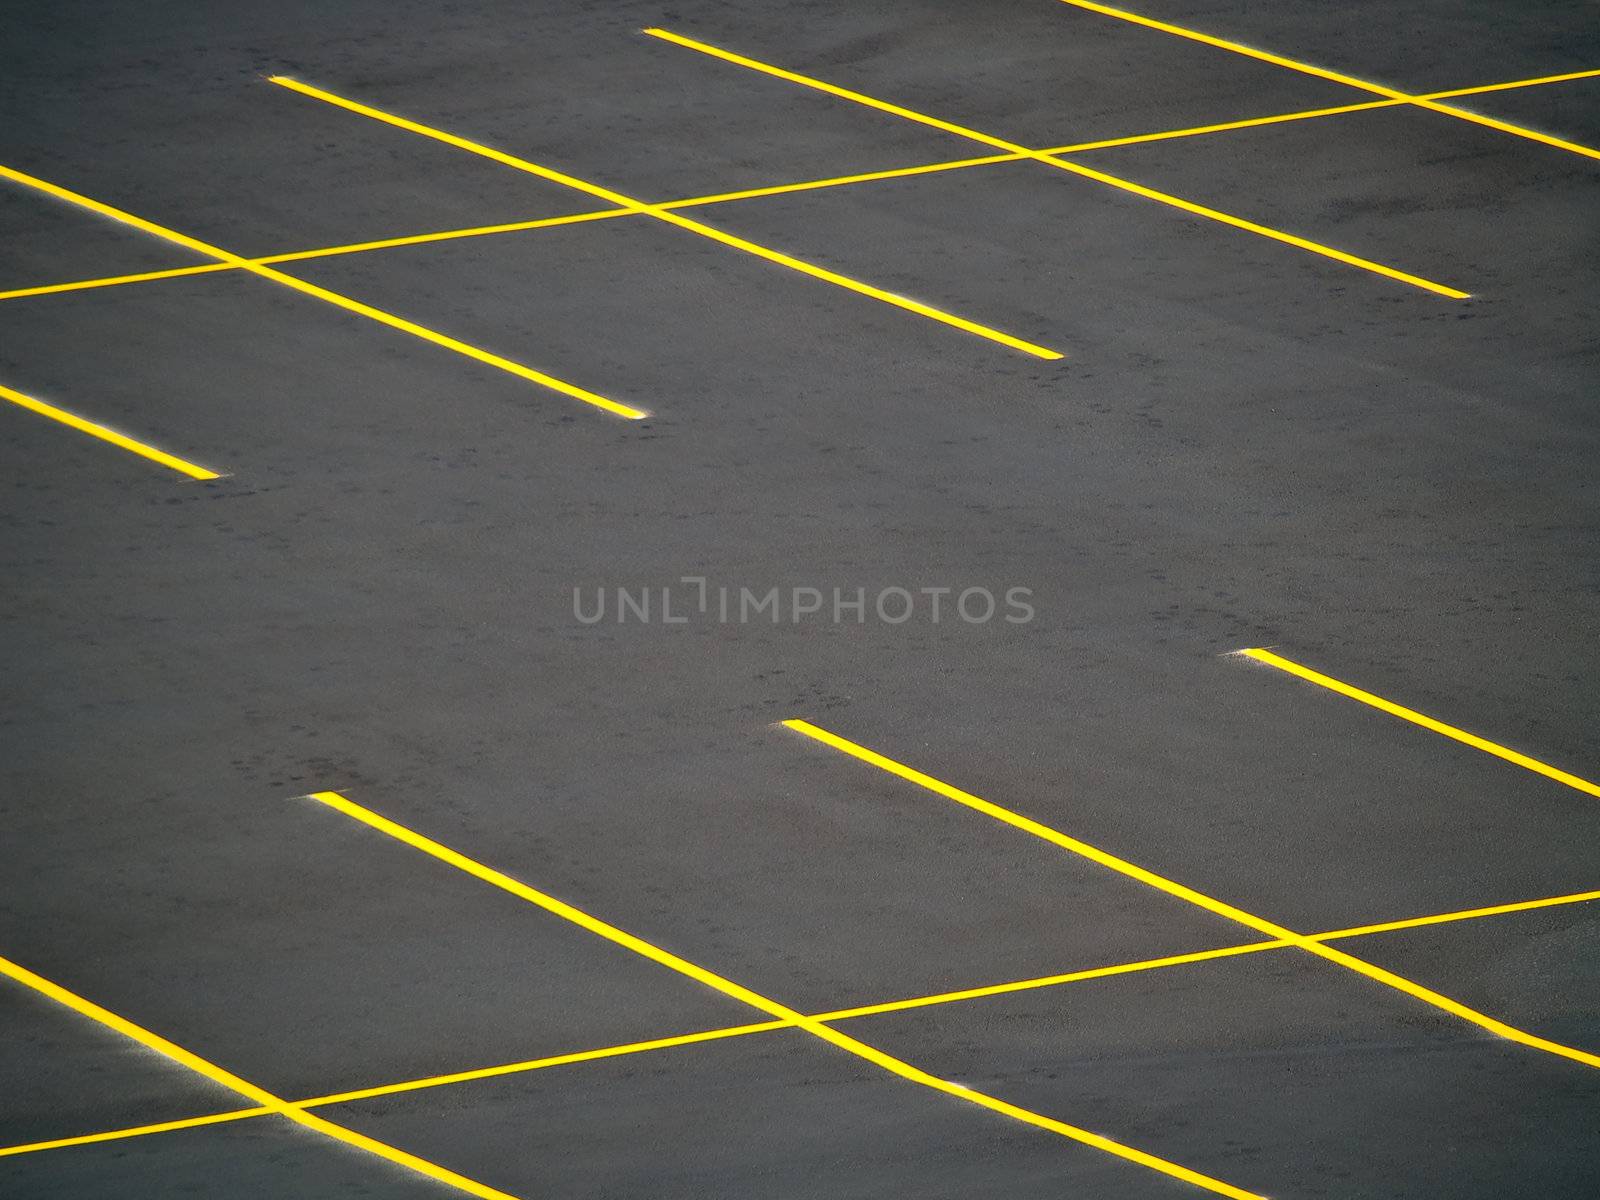 An empty parking lot with a grunge look